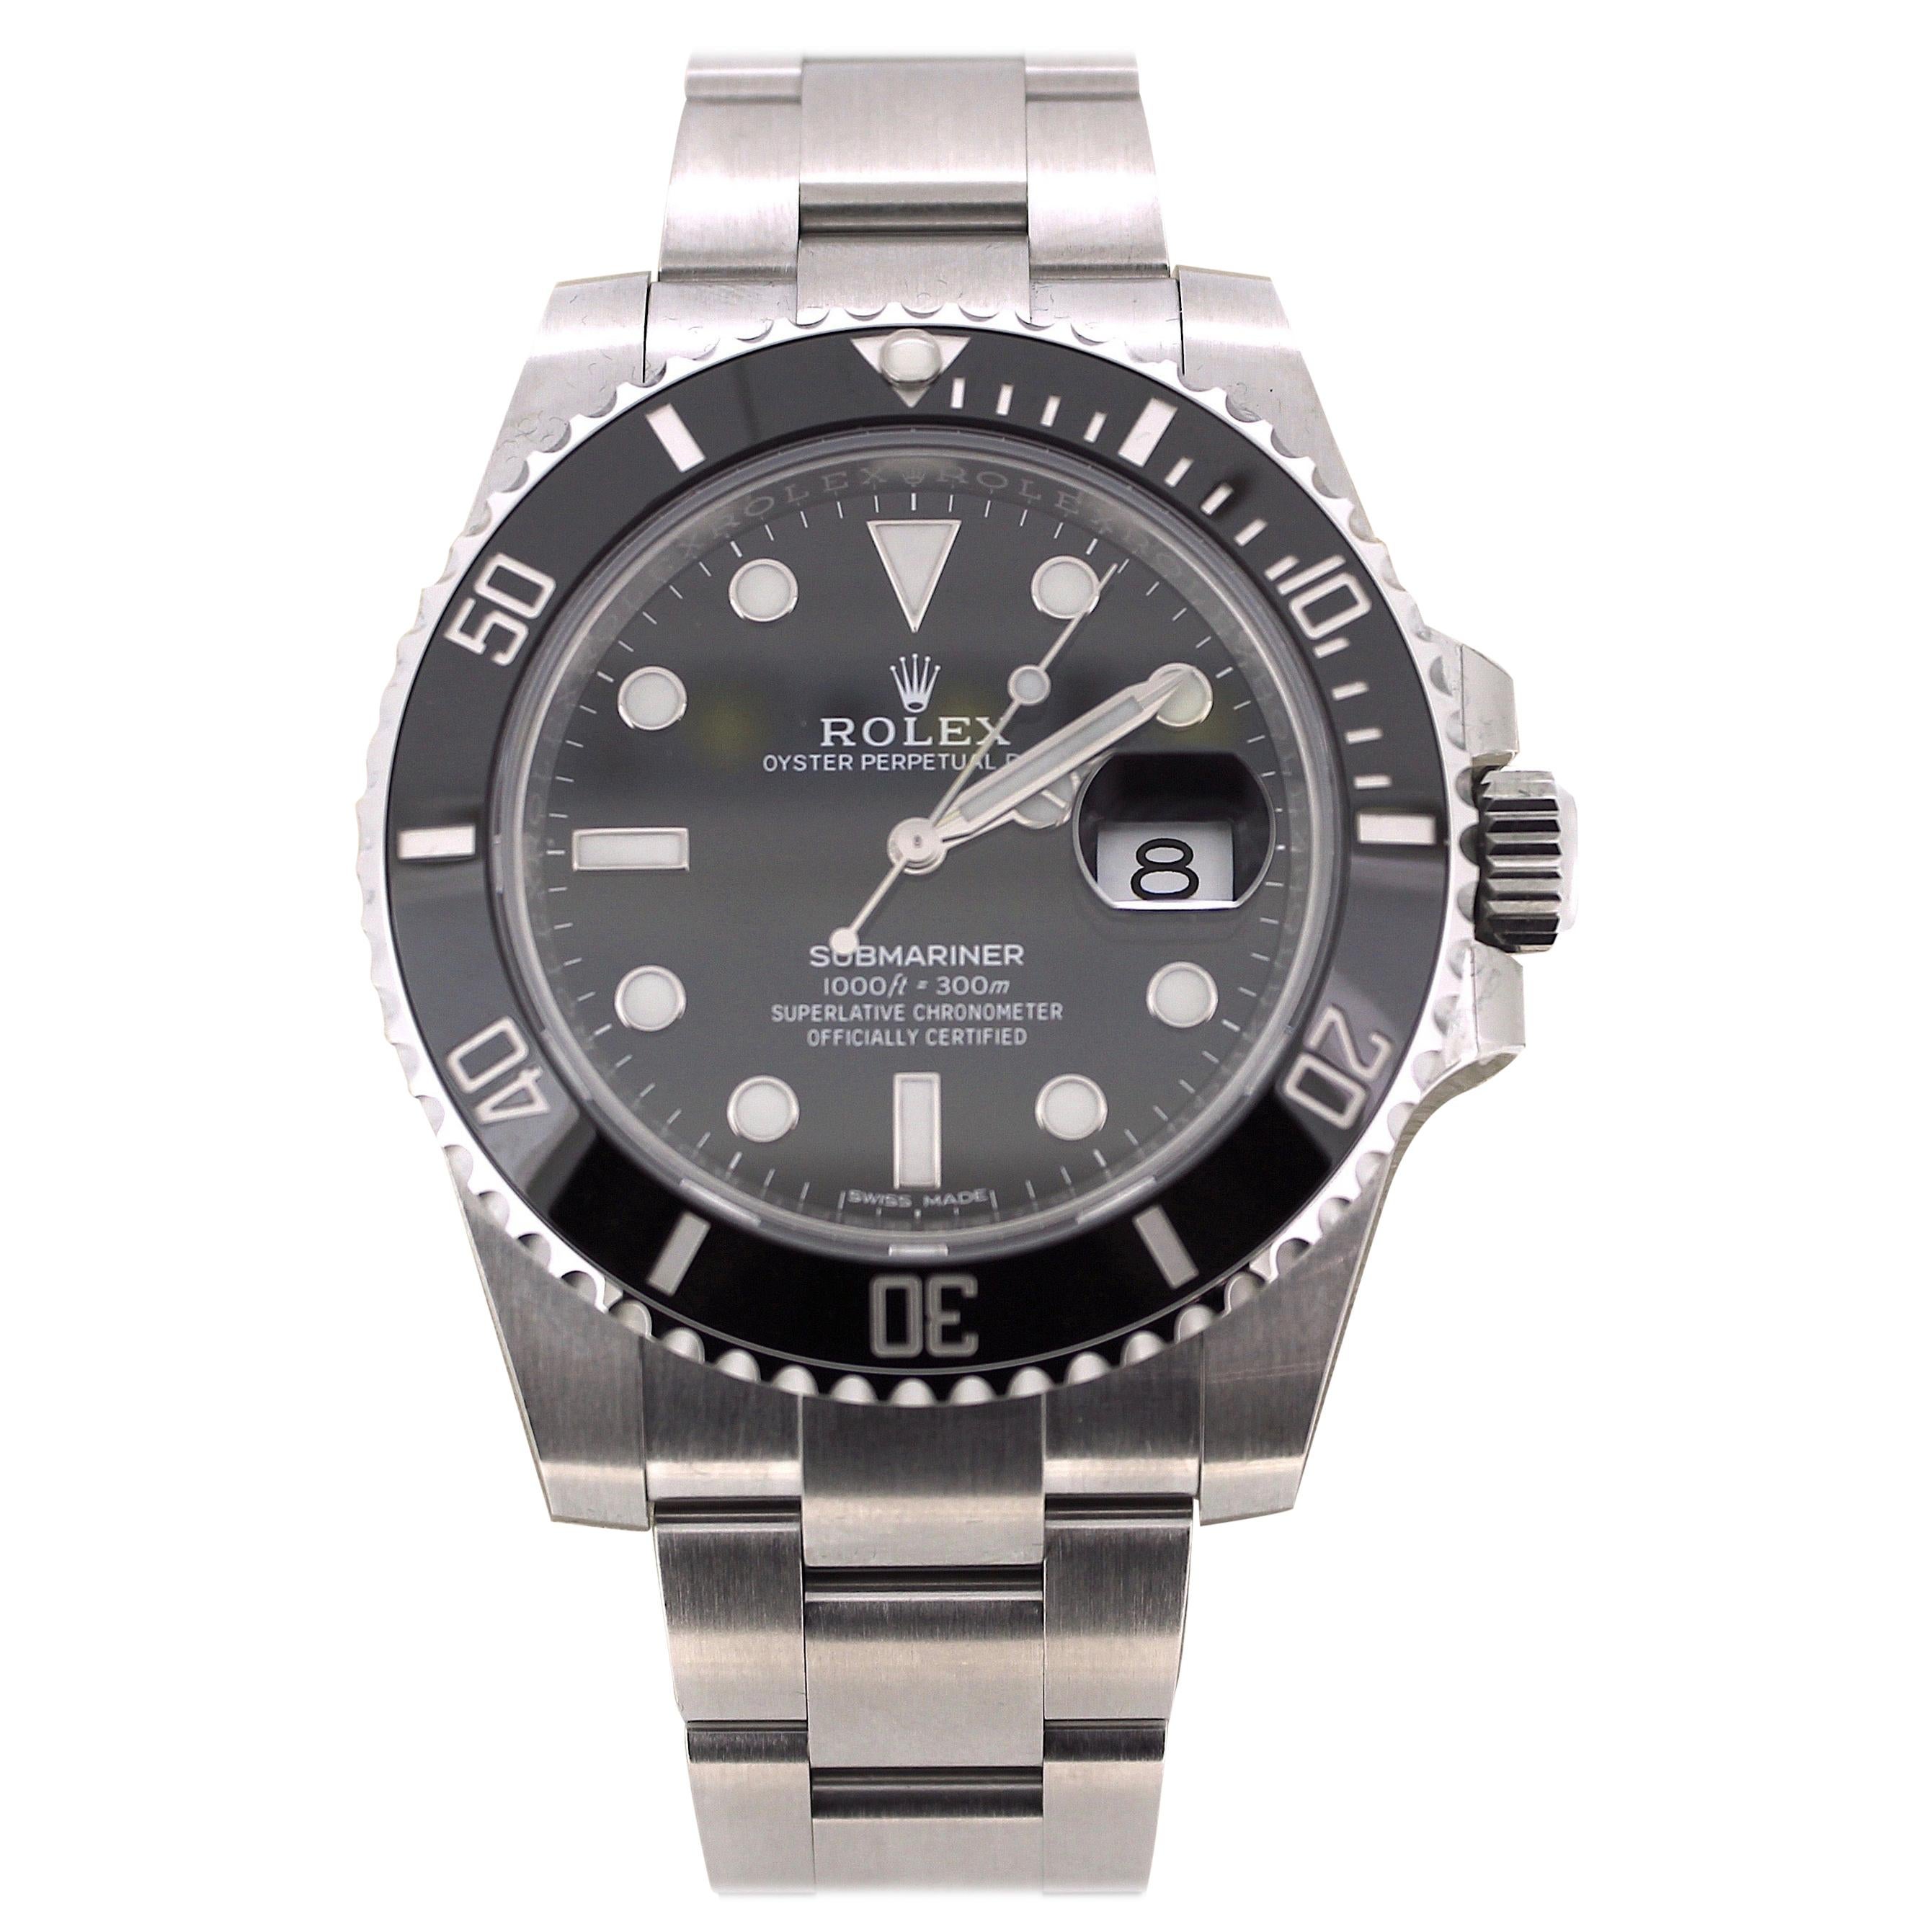 Rolex Oyster Perpetual Submariner 116610 Stainless Steel Watch Paper and Box